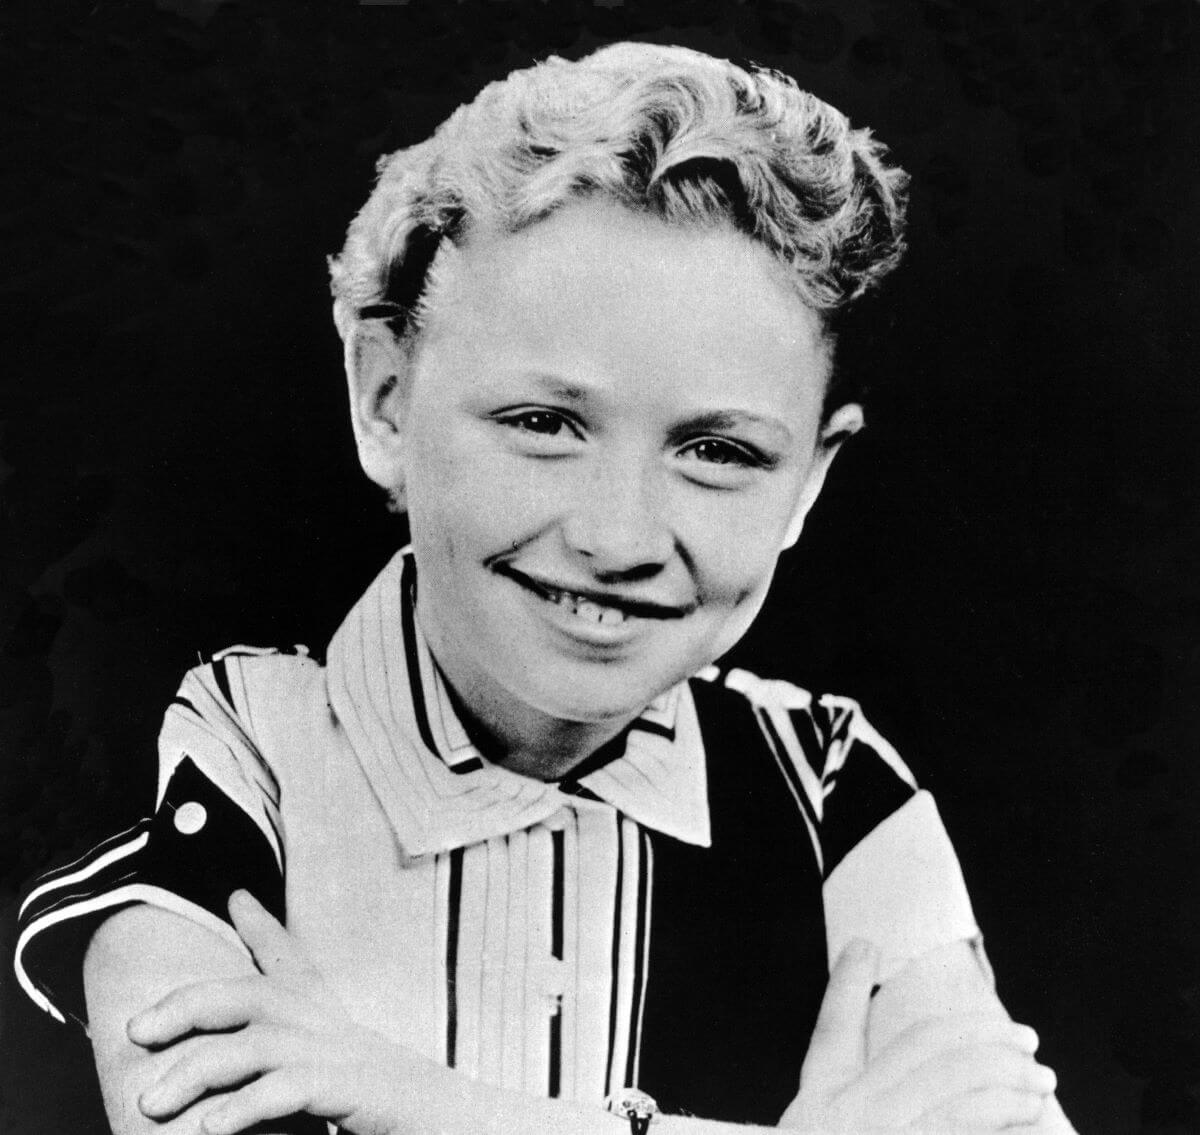 A black and white picture of Dolly Parton as a child. She wears a collared shirt and sits with her arms crossed.